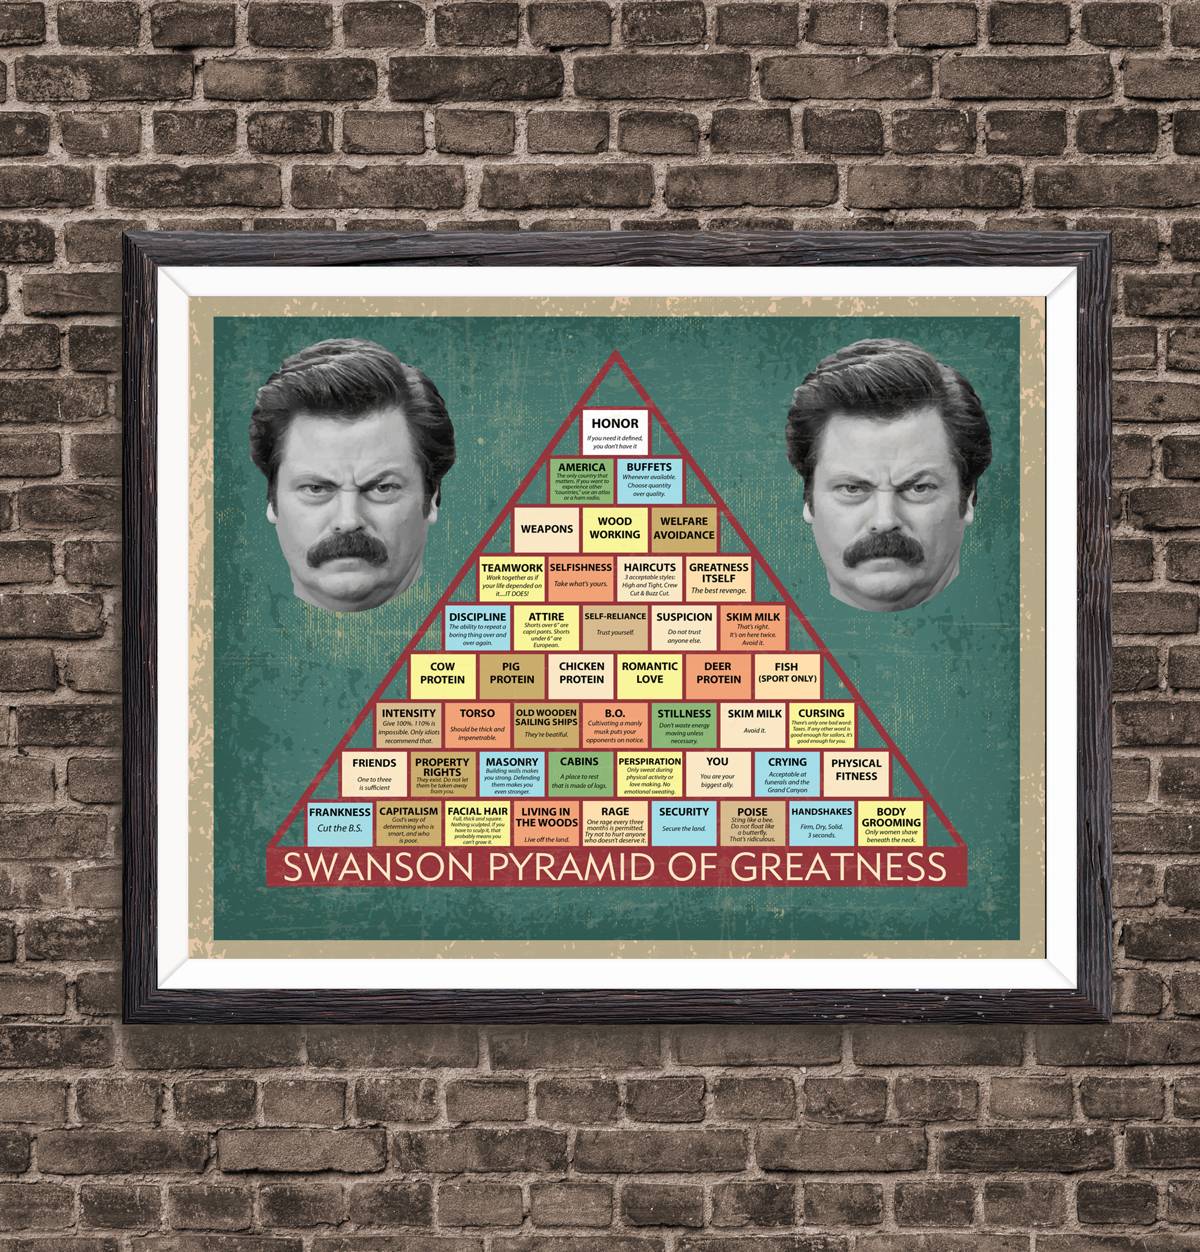 Ron Swanson Pyramid Of Greatness Poster Art Print, Parks. 